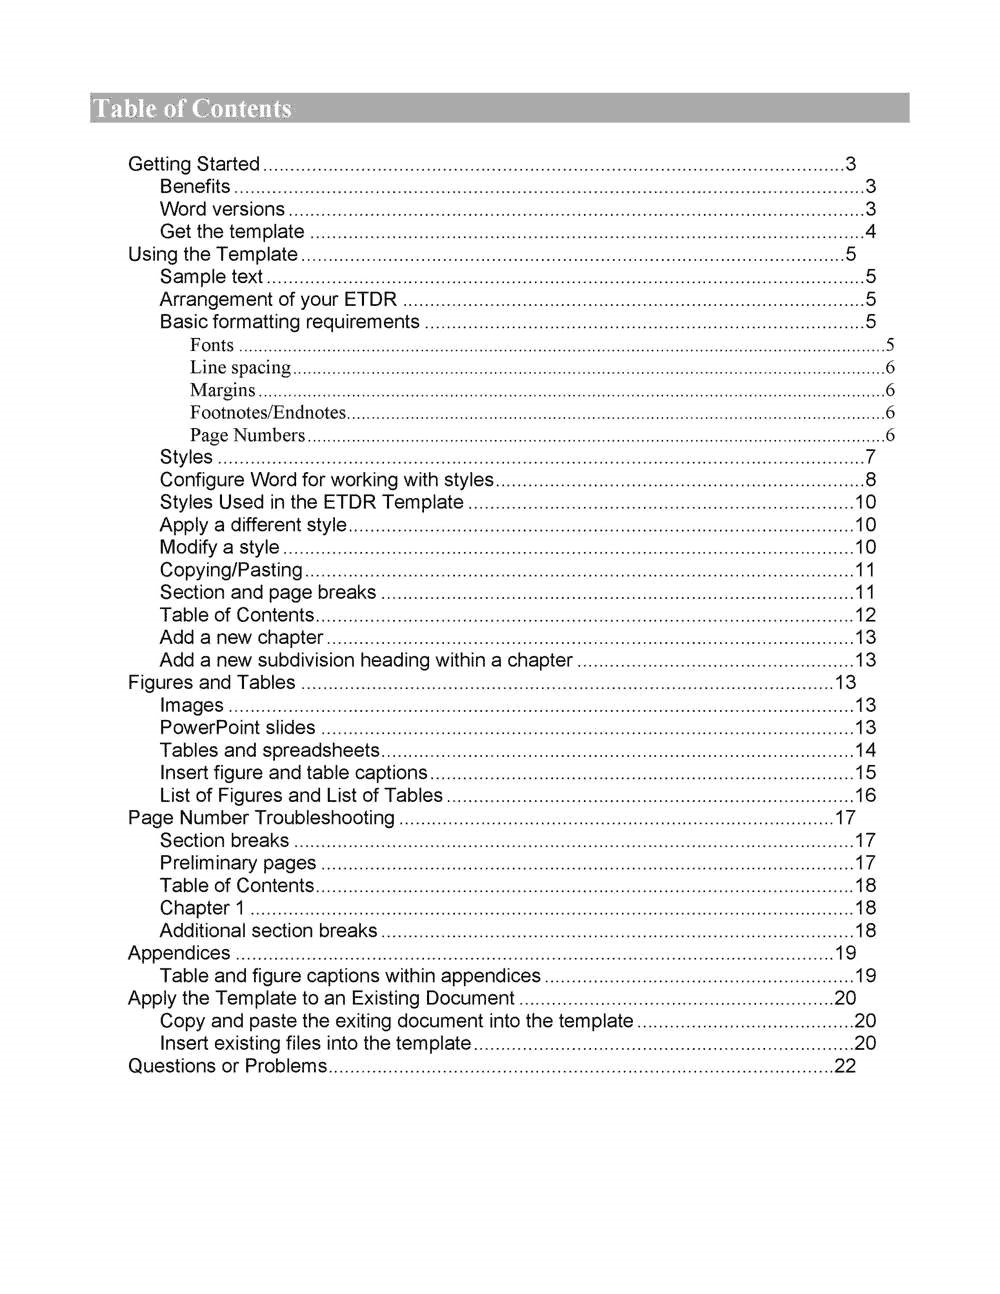 Table of Contents Template in MS Word